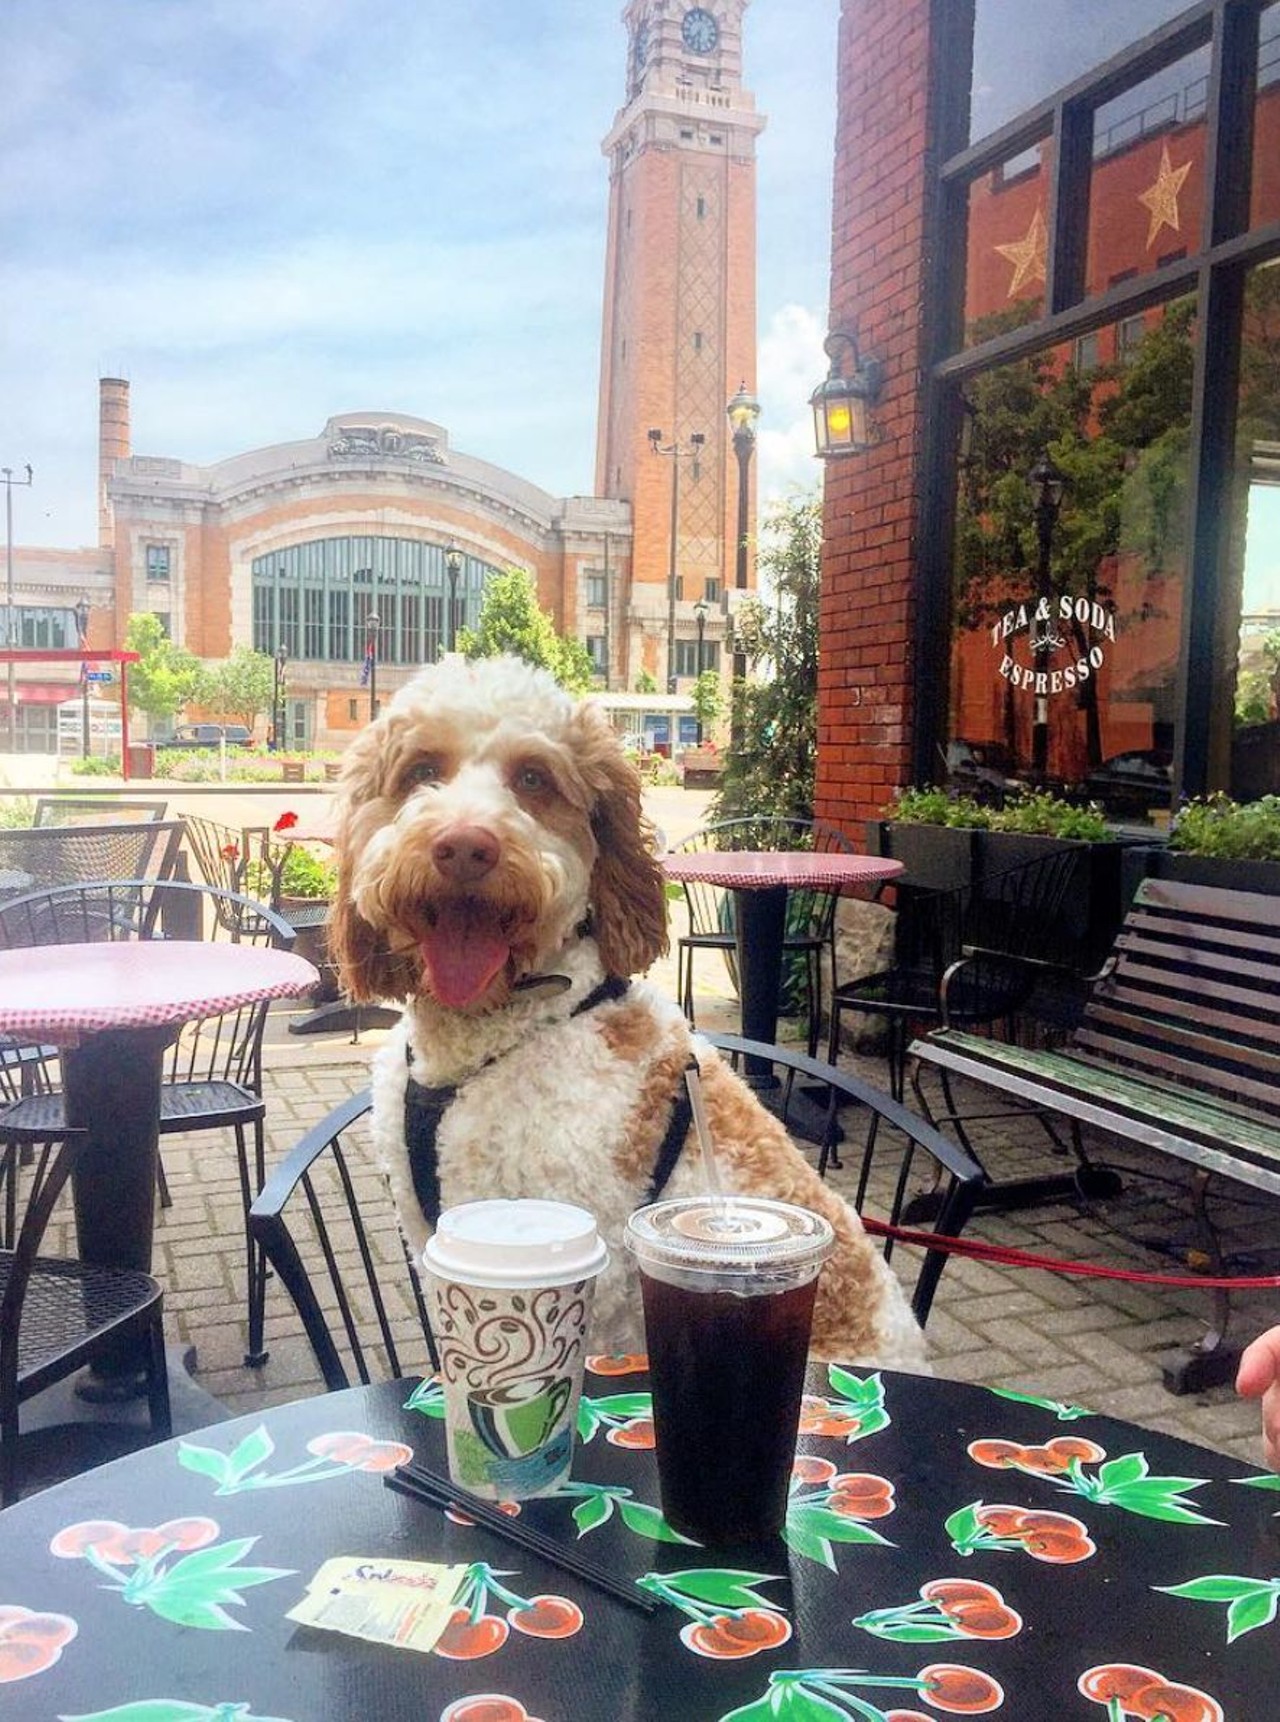  Koffie Cafe
2517 Market Ave., 216-861-2233
Koffie Cafe has an extensive amount of pastry options to pair with your coffee, and a great outdoor patio space perfect for soaking up summer sunshine with your best friend. 
Photo via onehappydoodle/Instagram